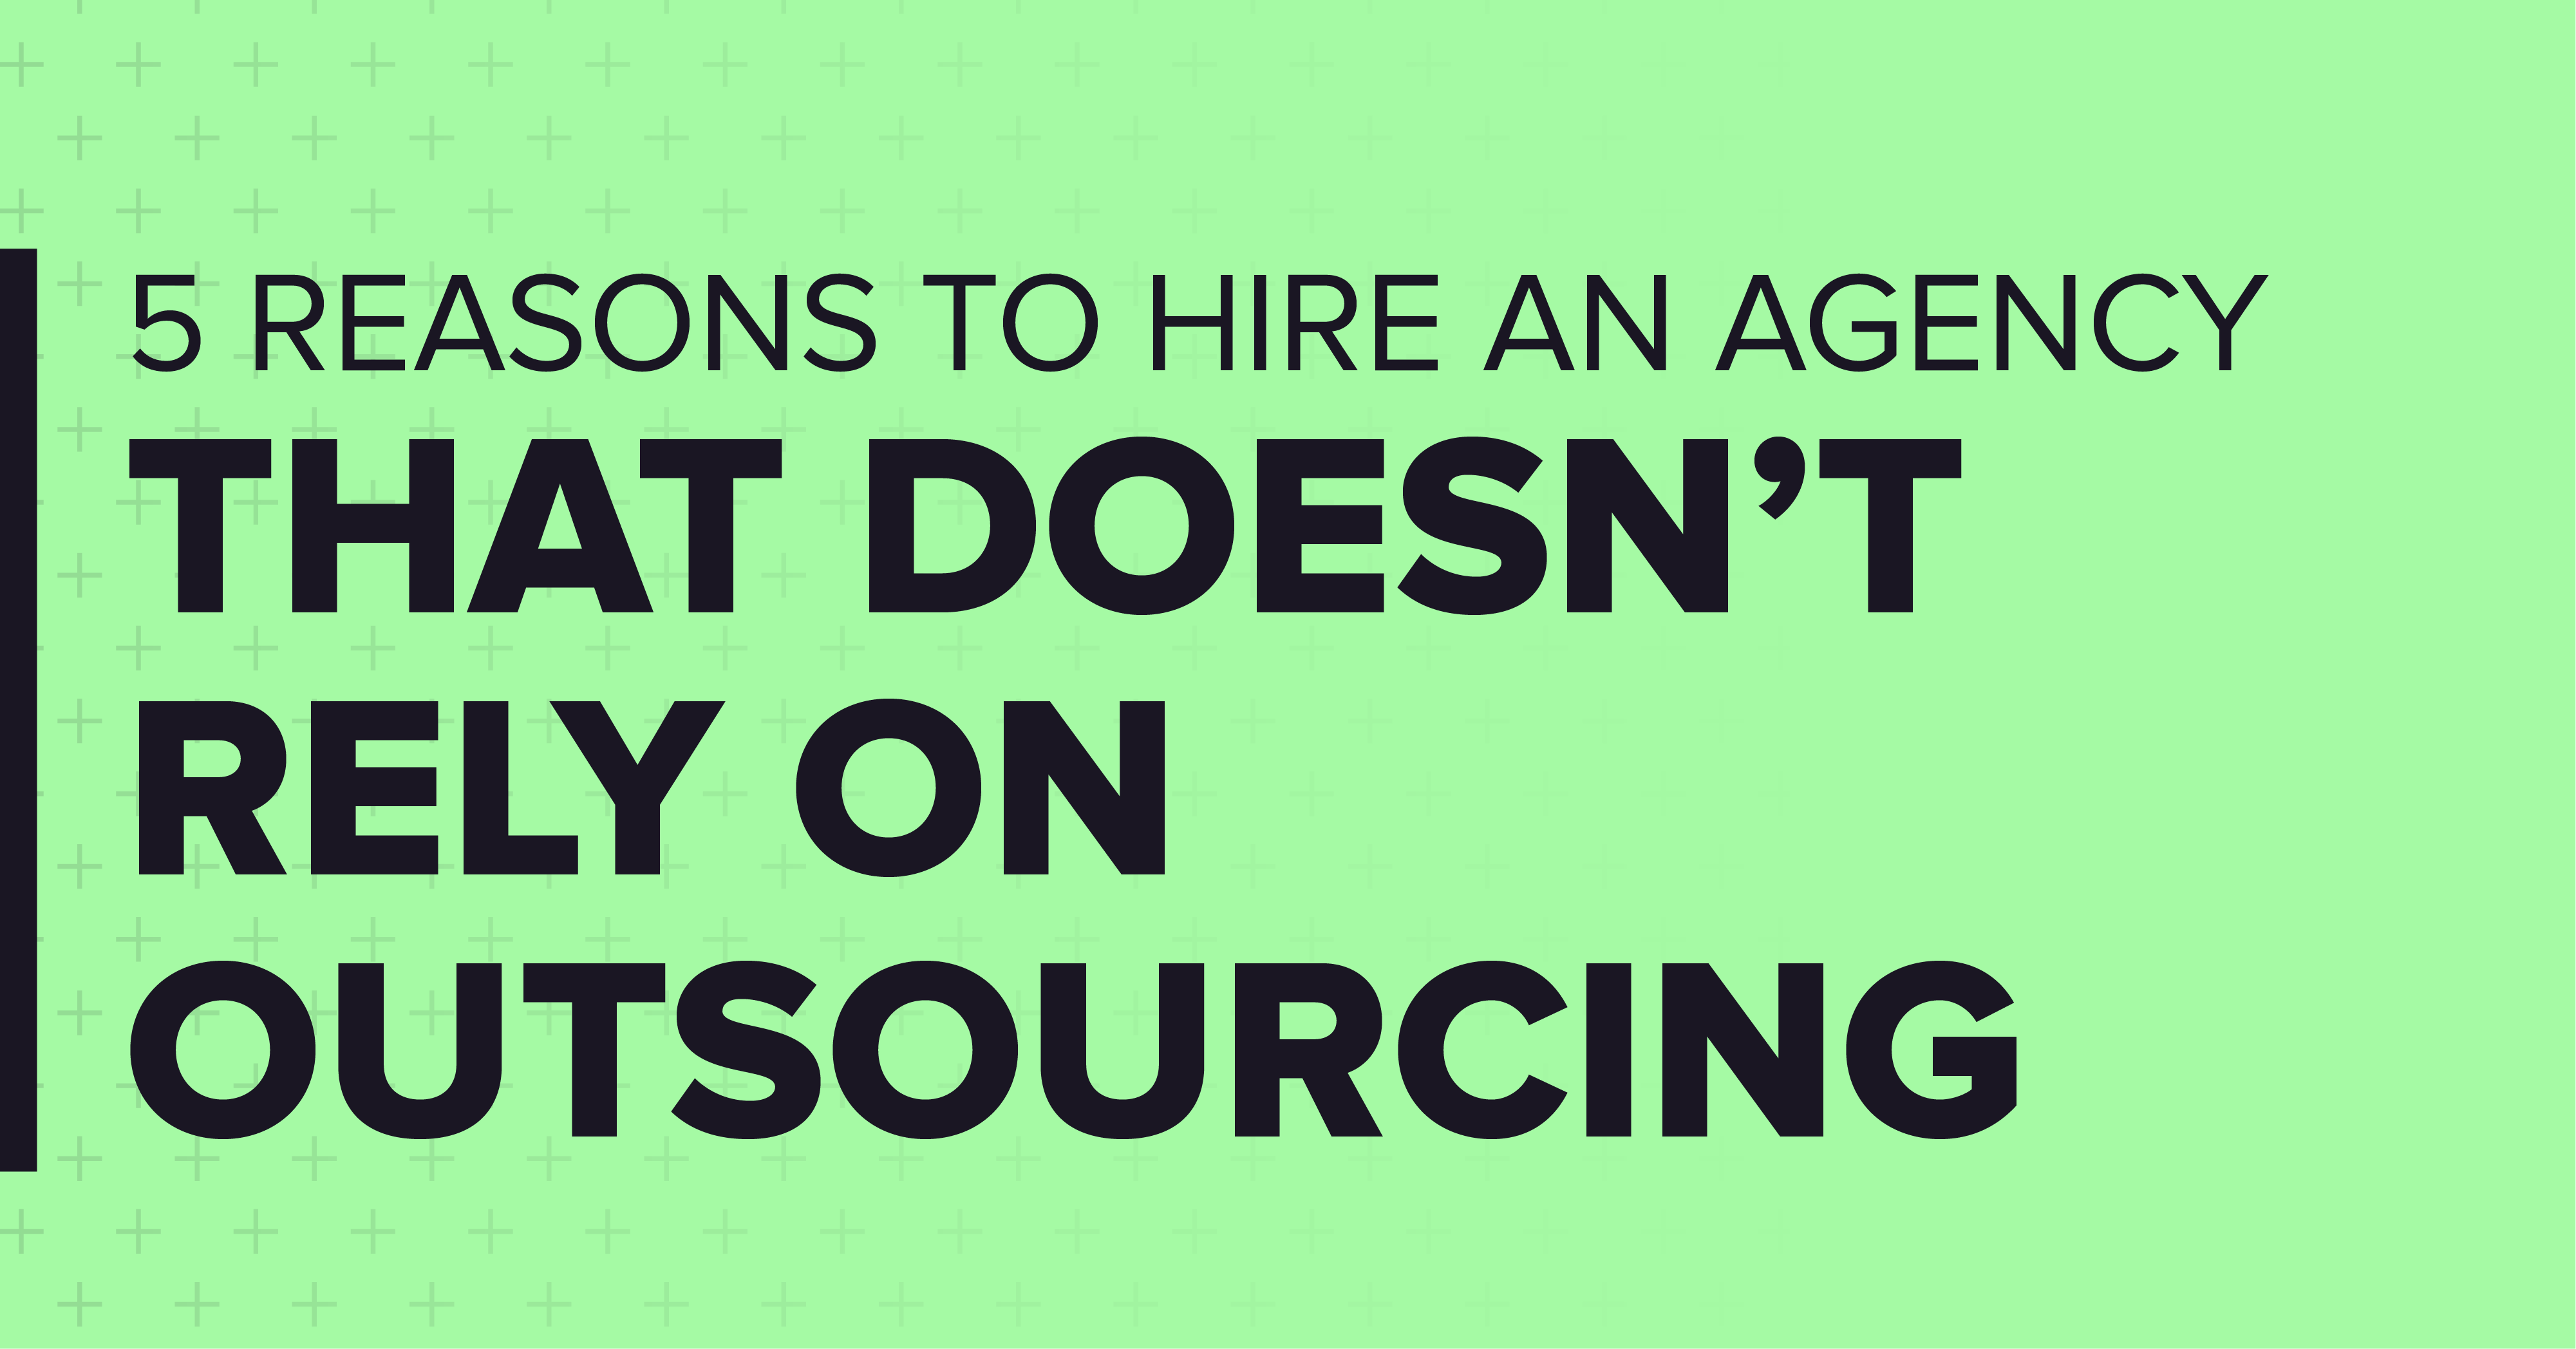 5 reasons to hire an agency that doesn't rely on outsourcing.